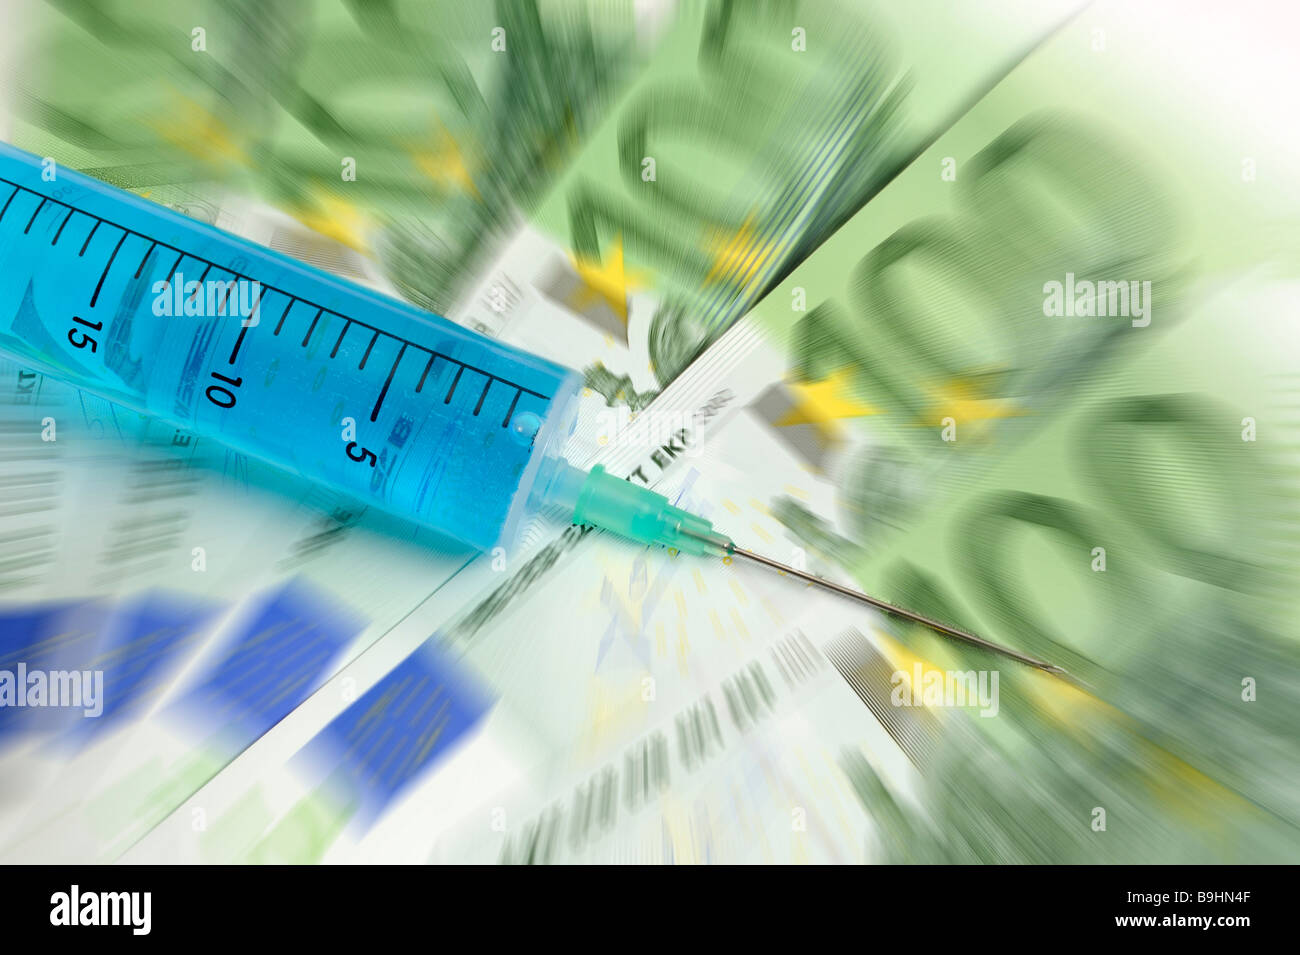 Injection needle on banknotes, symbolic picture for cash injection Stock Photo